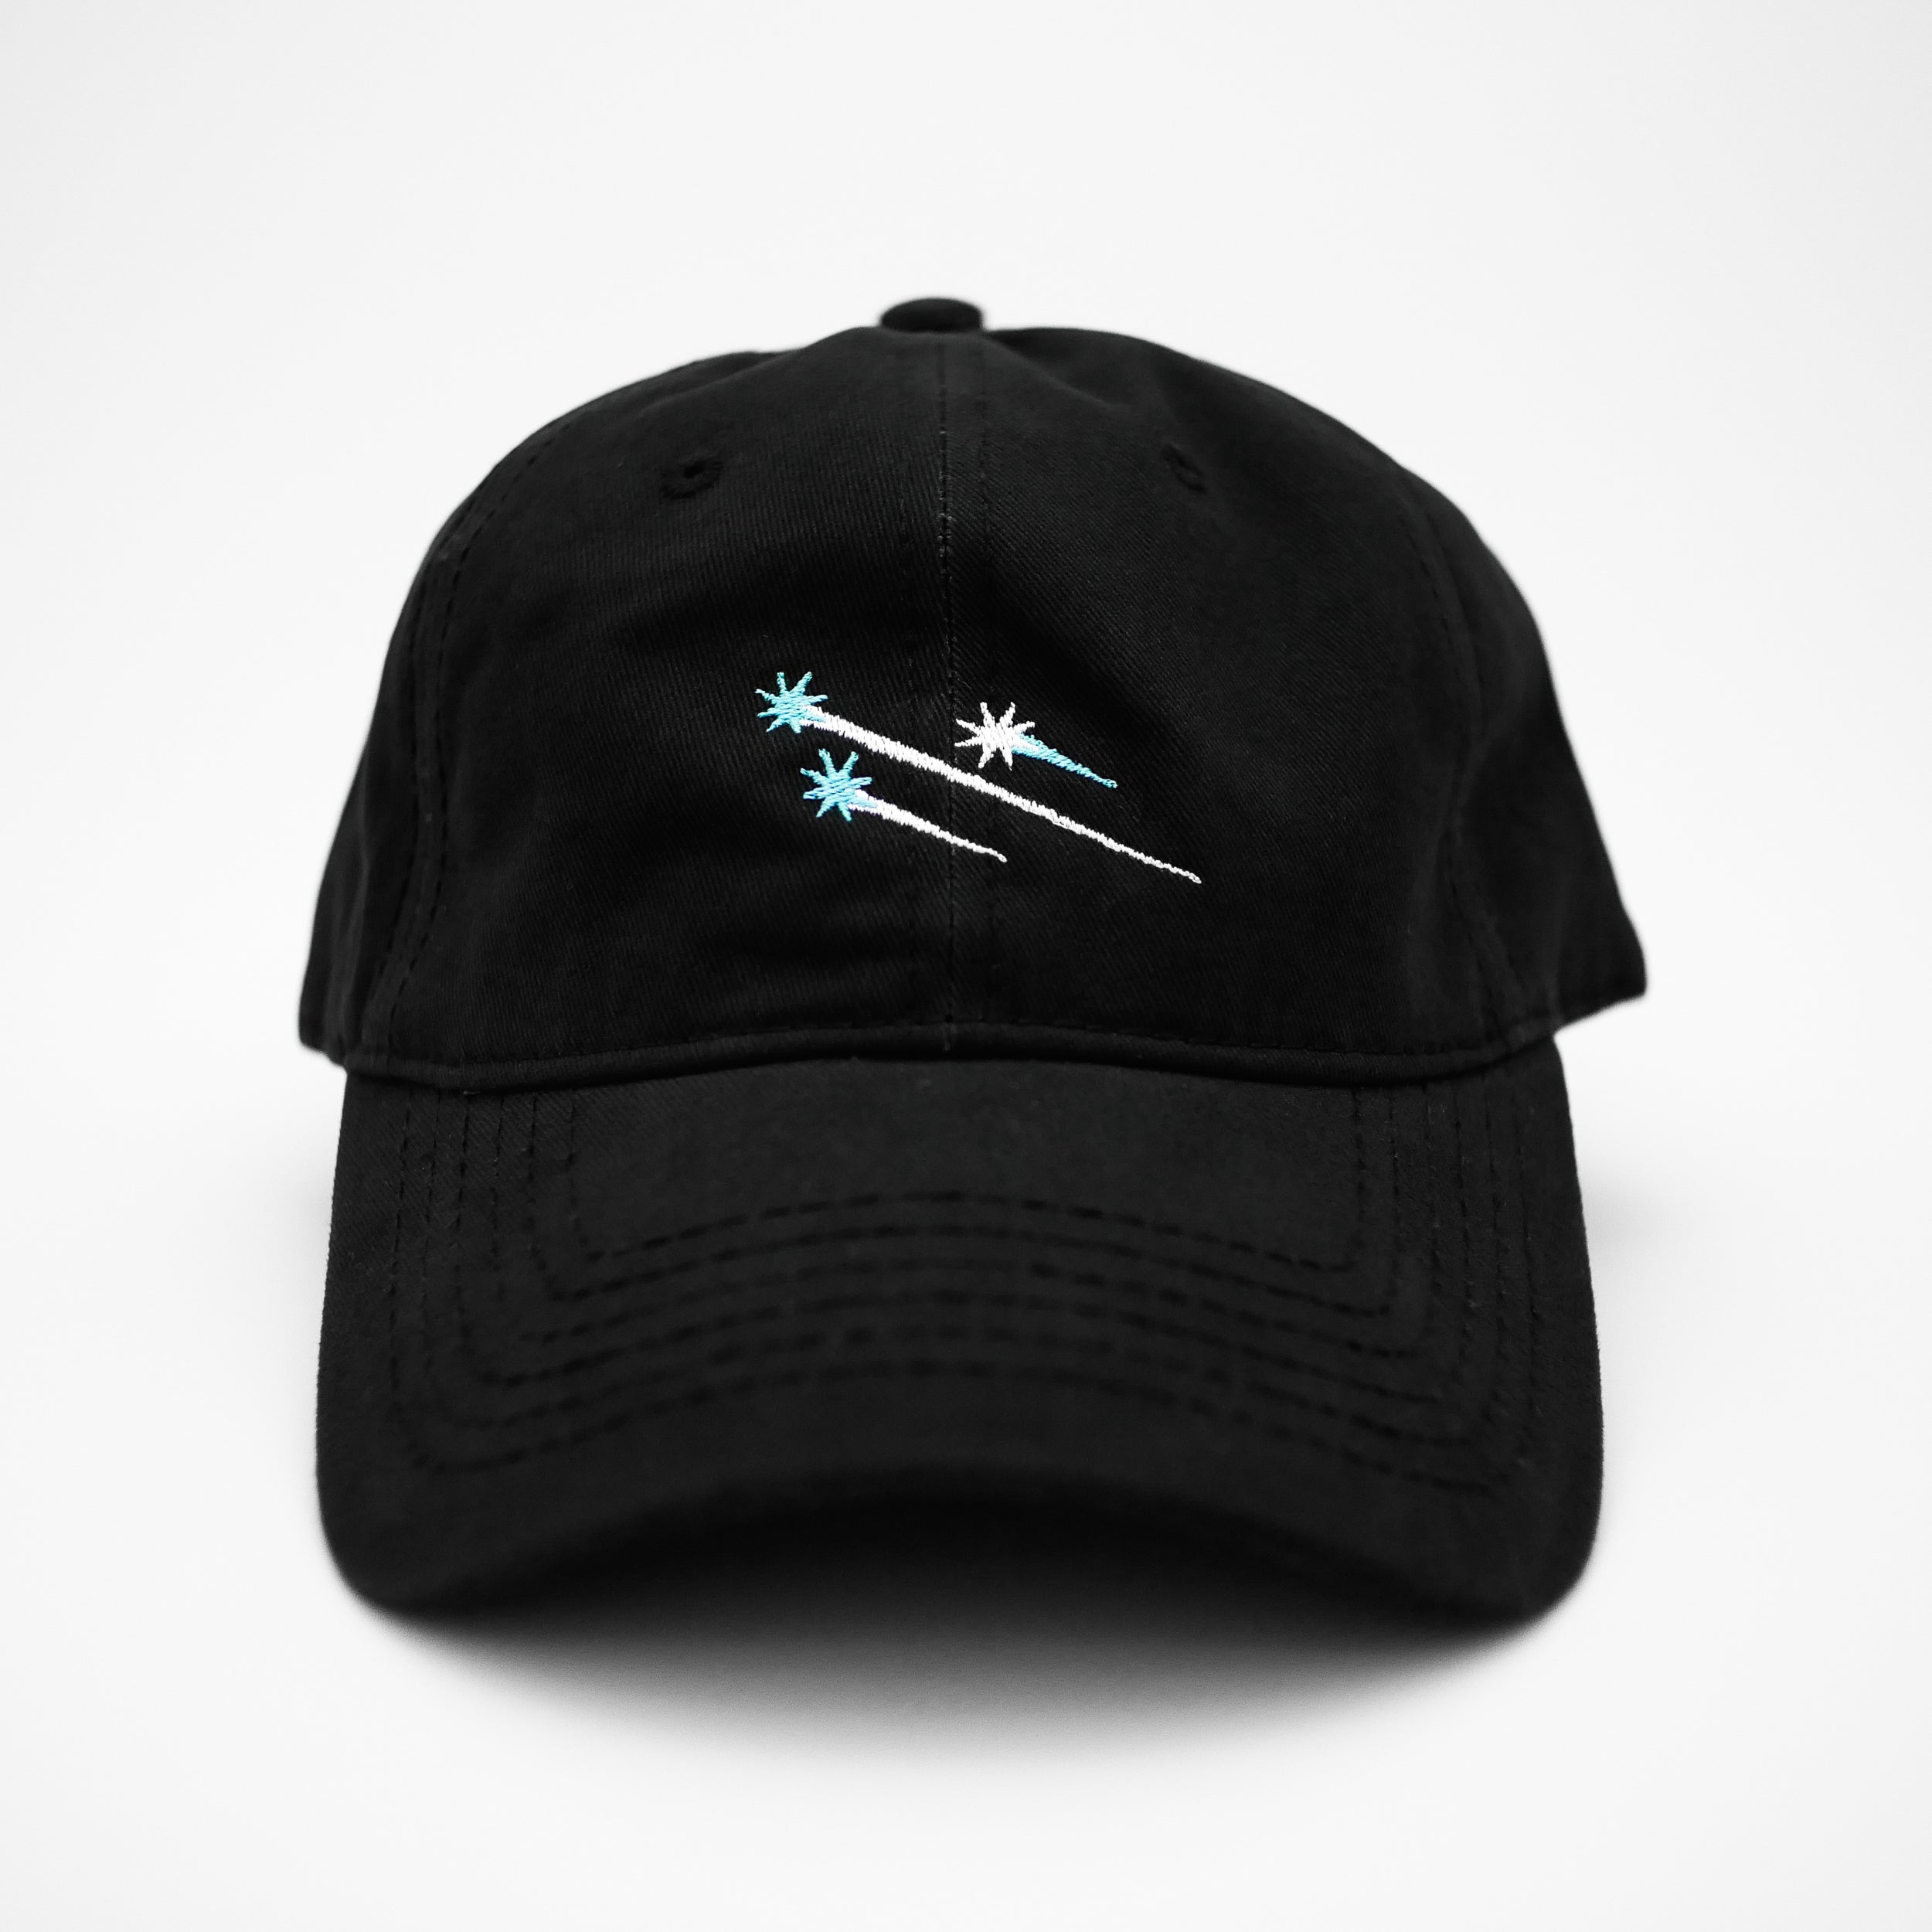 Front view of the embroidered ÉTOILE black dad hat from PHOSIS® Clothing